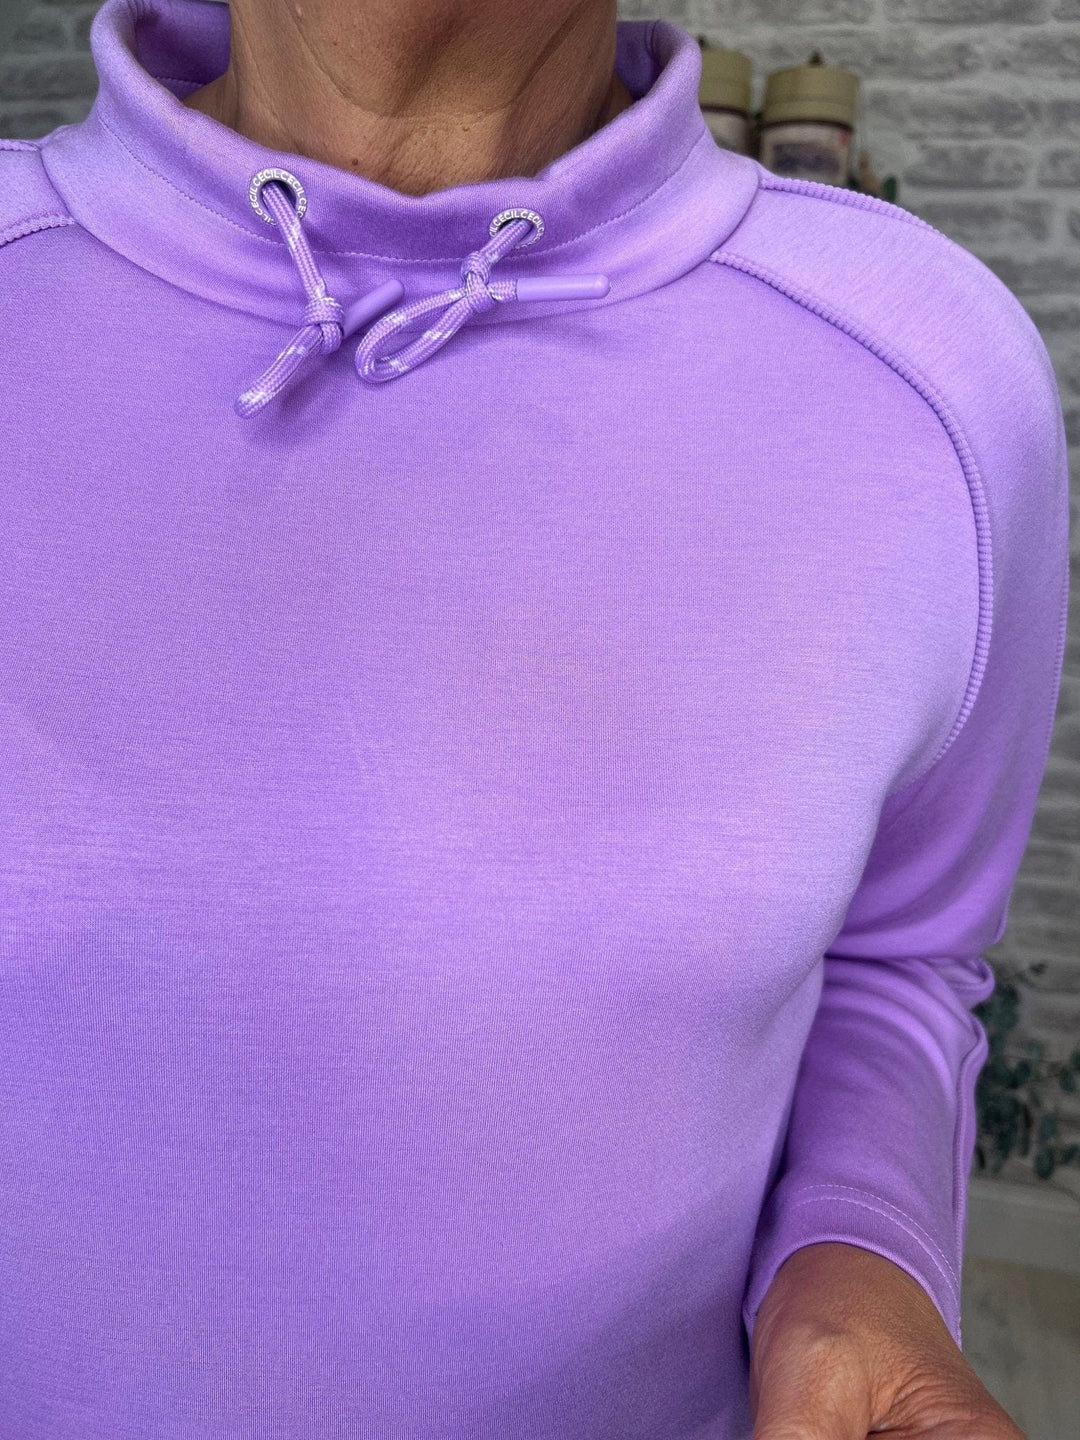 Cecil Matmix Sweatshirt In Sporty Lilac - Crabtree Cottage